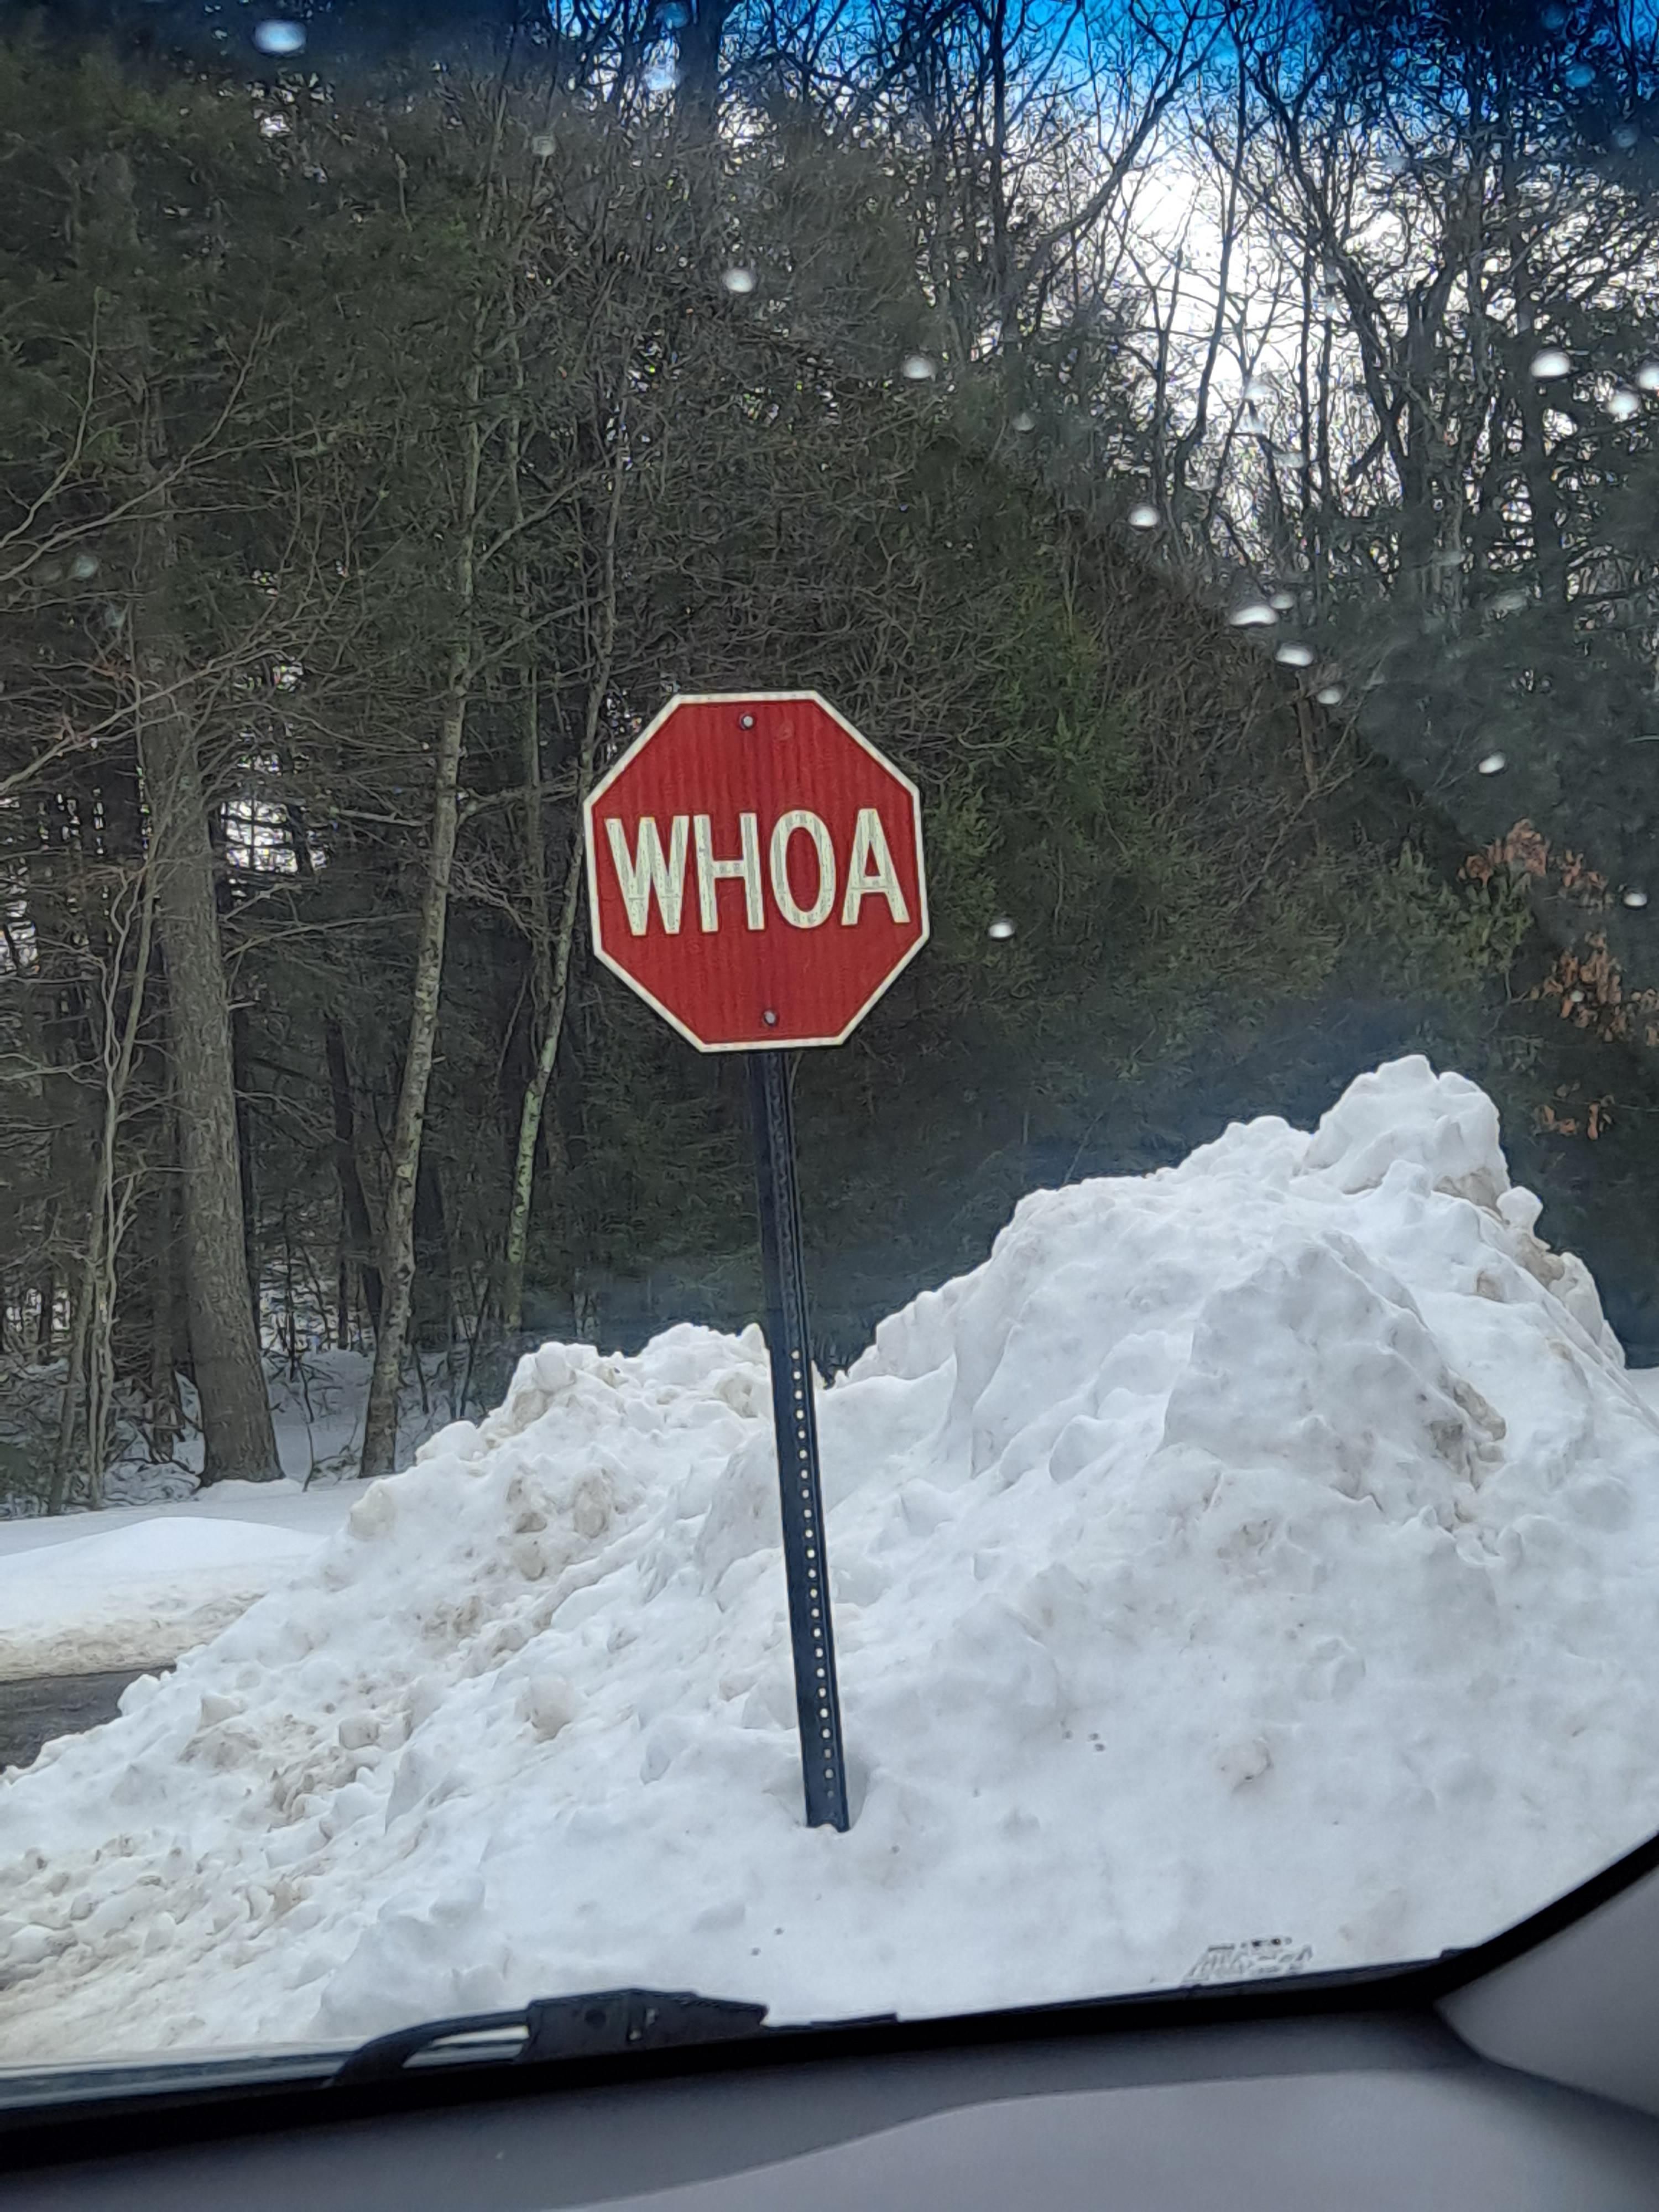 Best stop sign ever!